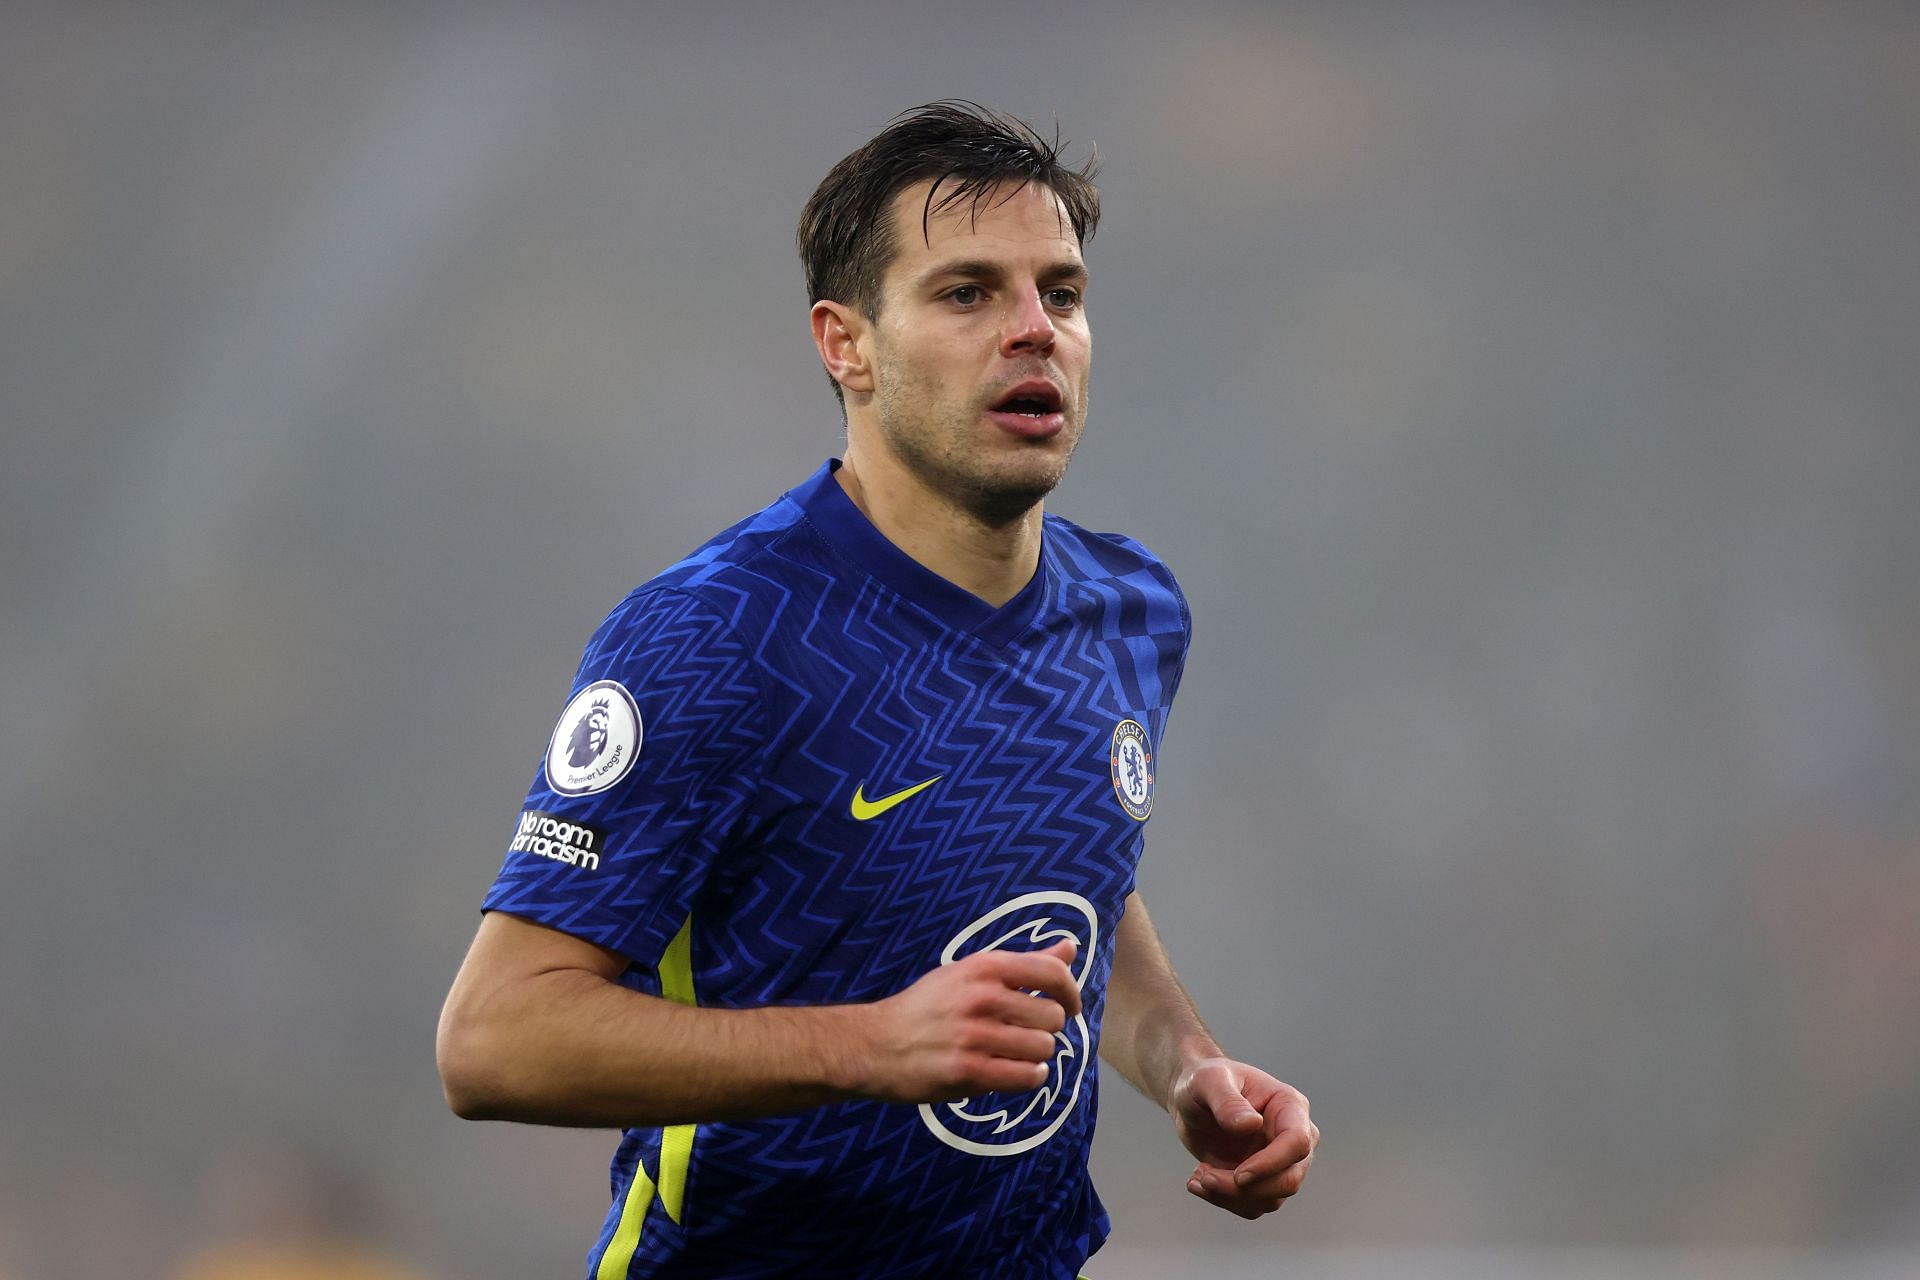 Atletico Madrid have identified Azpilicueta as the ideal replacement for Trippier, who left for Newcastle.